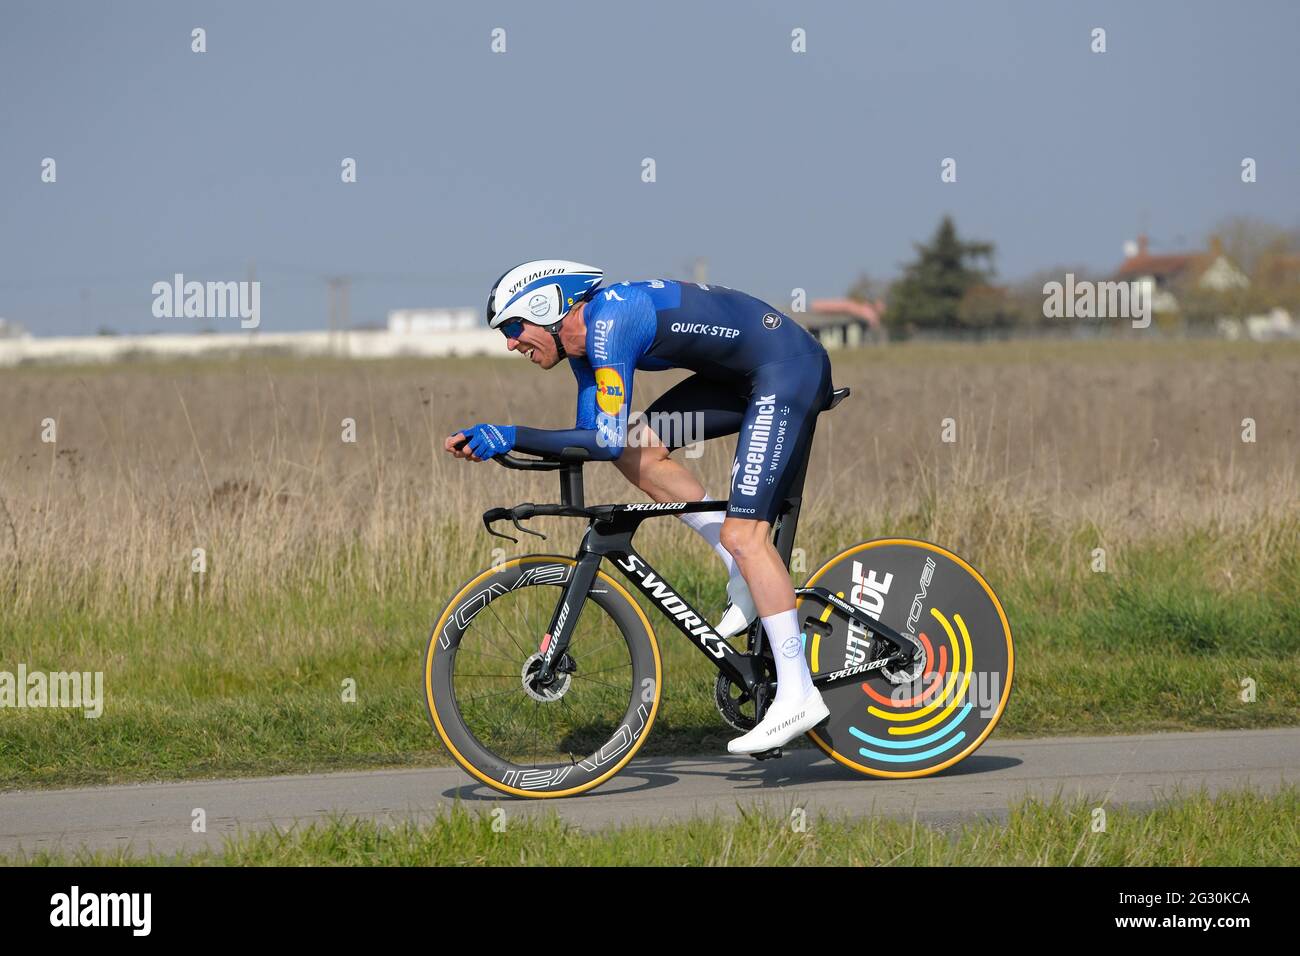 Belgian rider (team Deceuninck-Quick Step) seen in action during the time trial. He finished the 86th stage, 1'11" behind the winner. He finishes 64th in the final classification of